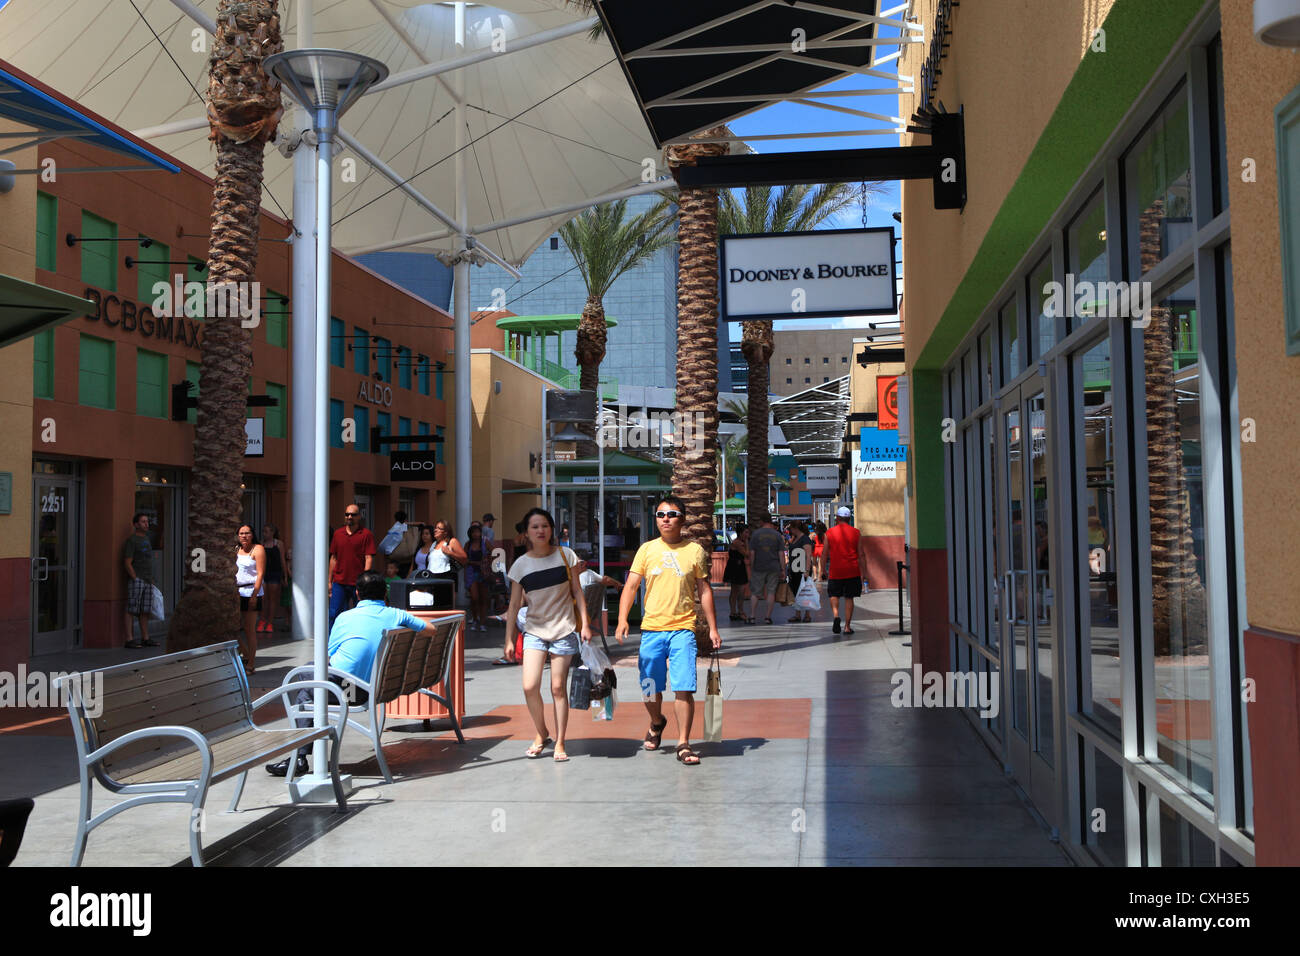 Premium outlets las vegas hi-res stock photography and images - Alamy